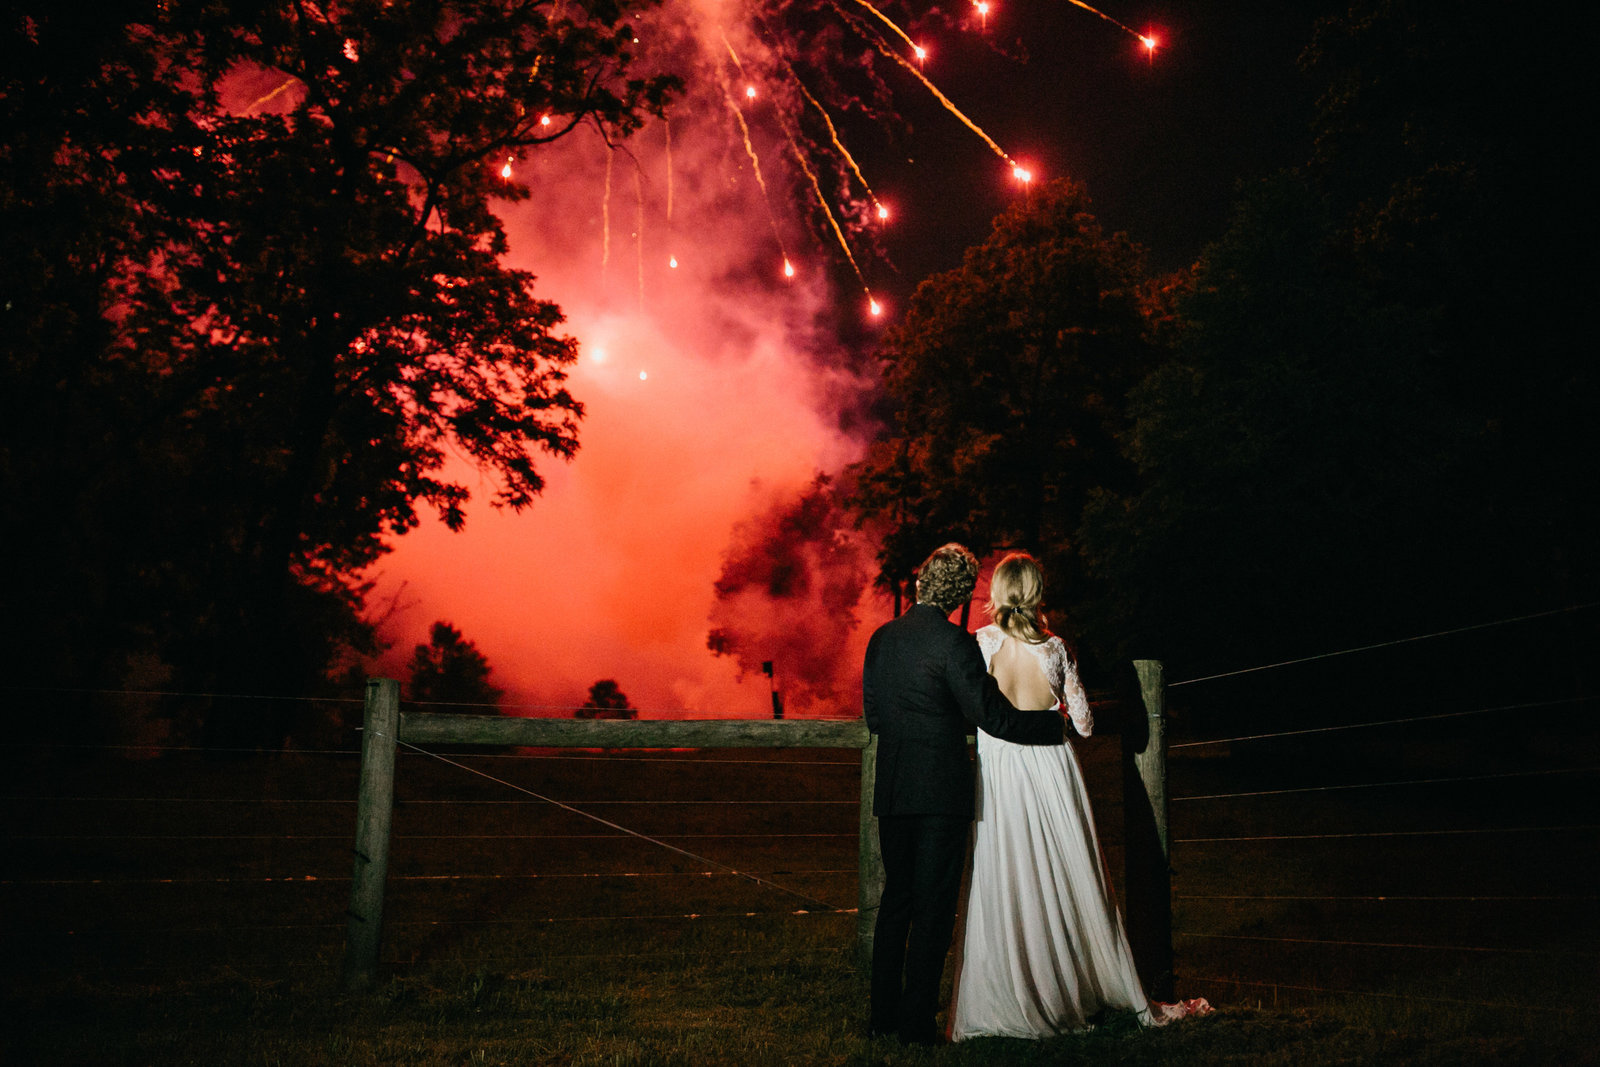 Bride and groom enjoy fireworks together at their reception on this family estate.